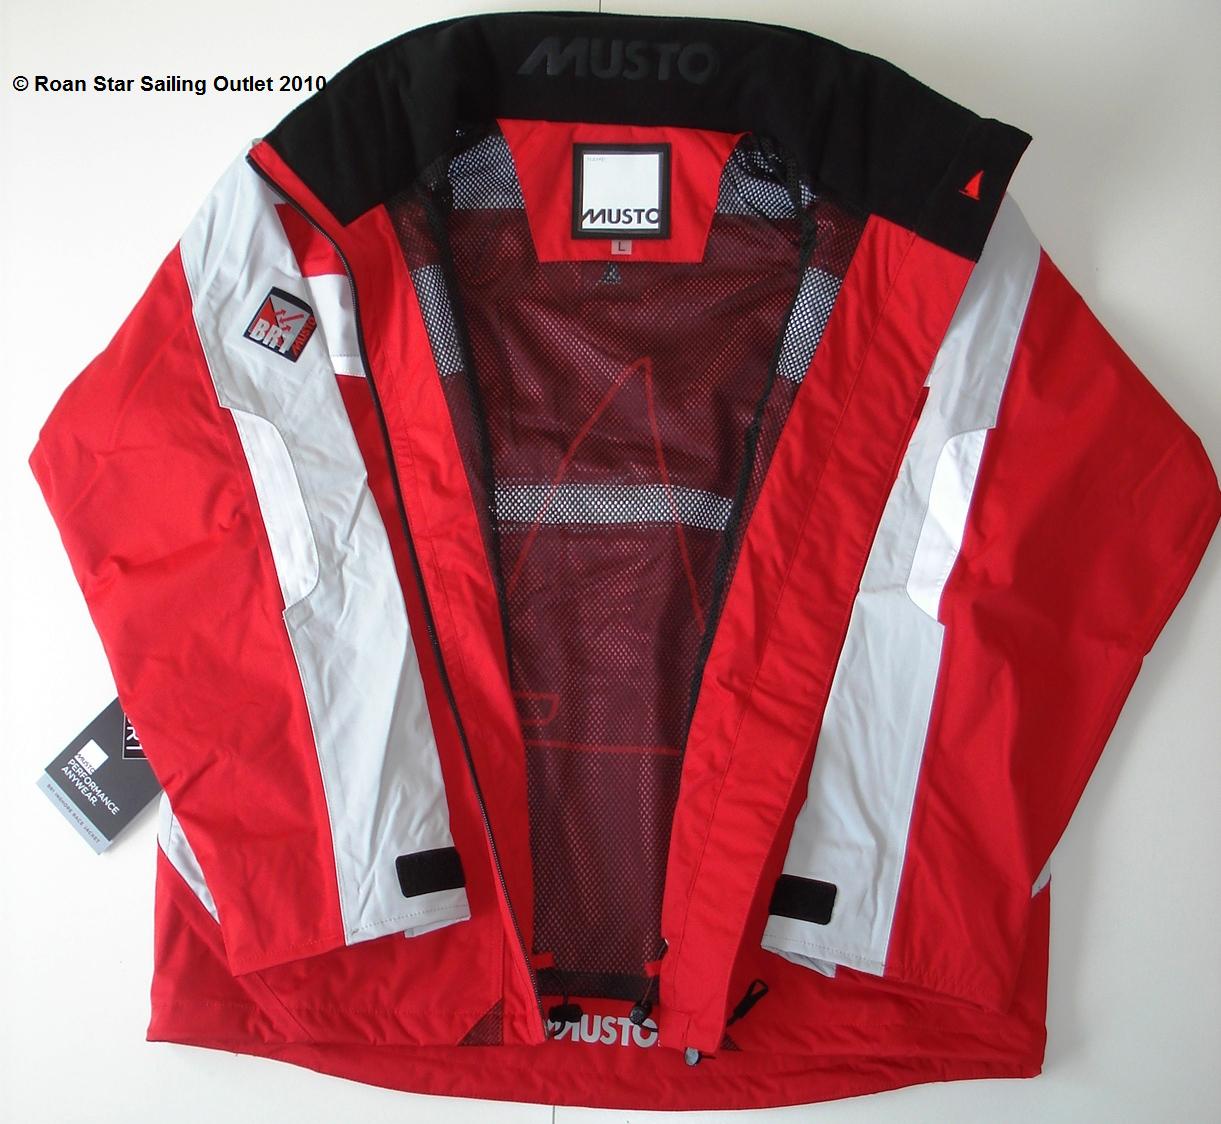 Roan Star Sailing Outlet News: Discount Sailing Jackets: MUSTO BR1 ...